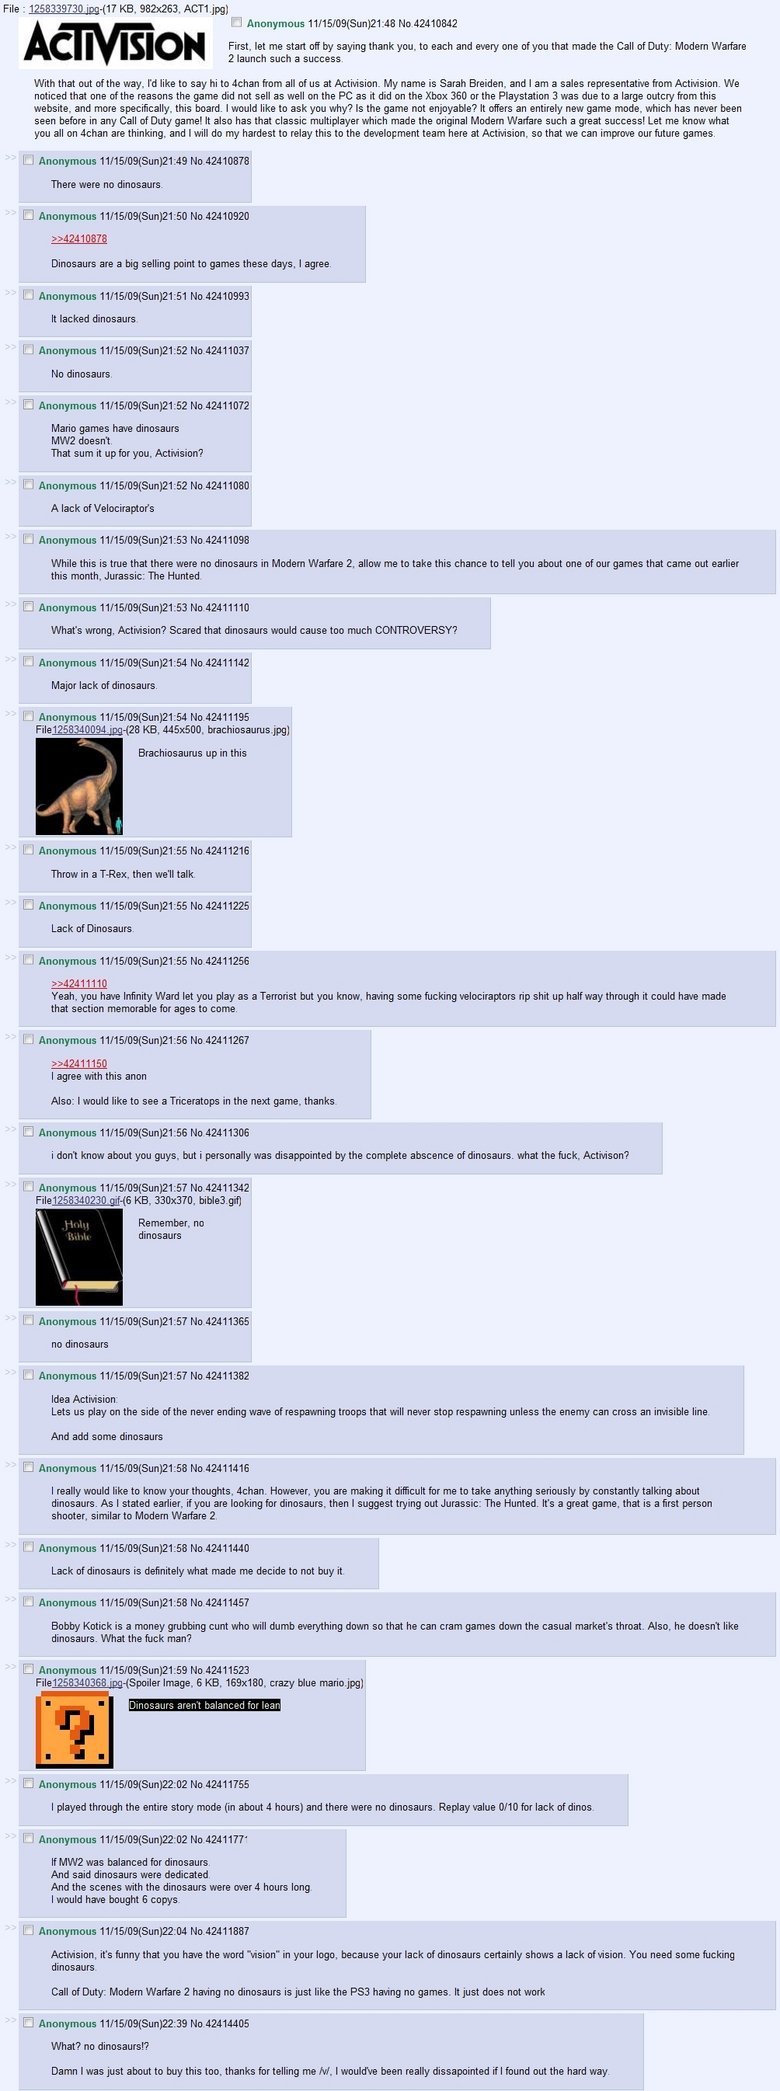 Hilarious+4chan+Dinosaur+Thread+I+posted+this+a+while+back_28eb54_1122515.jpg